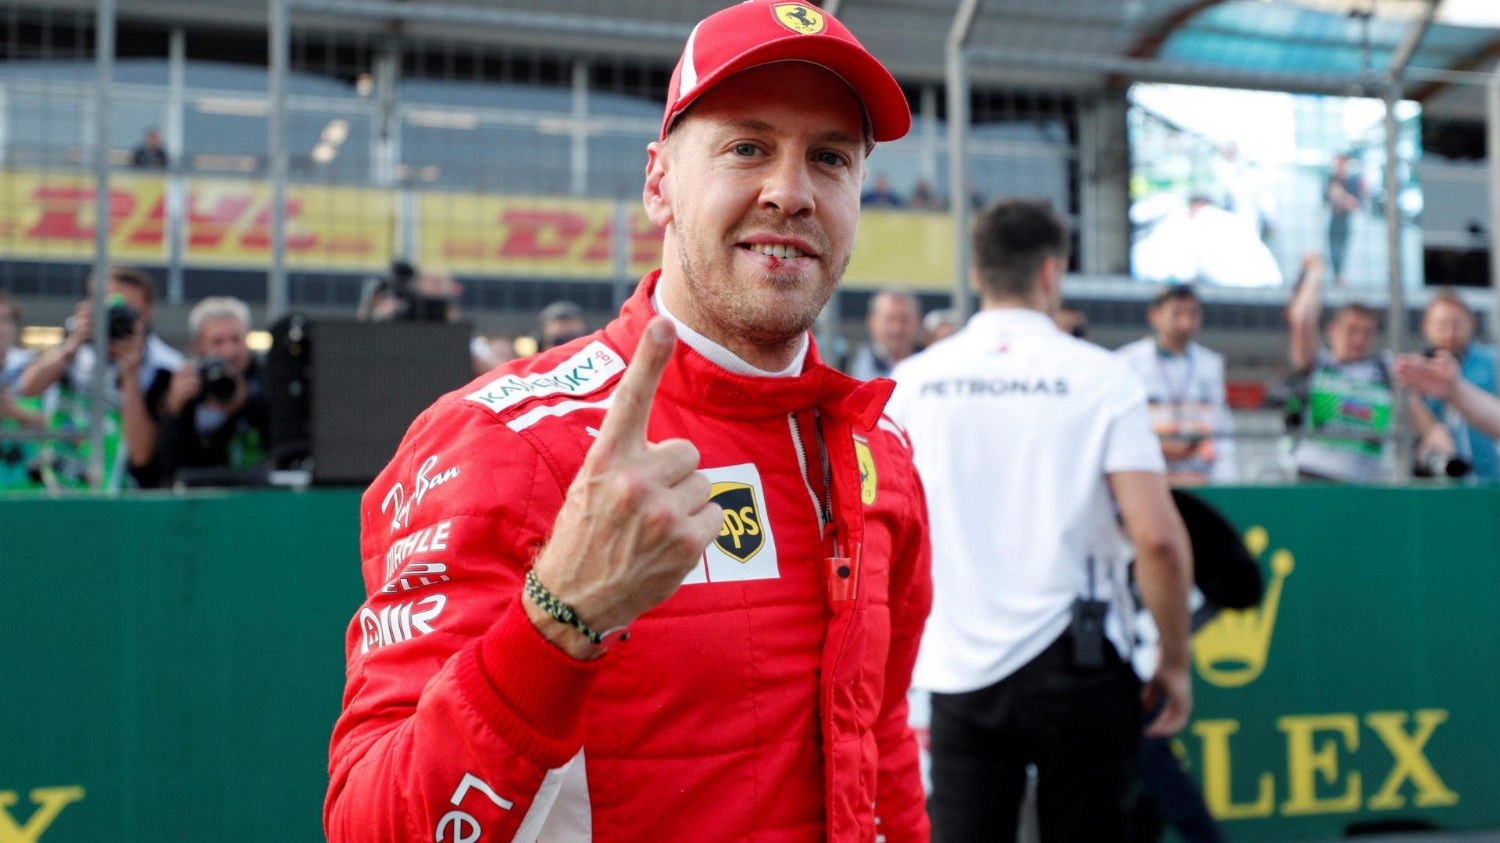 Vettel was #1 but not at the end